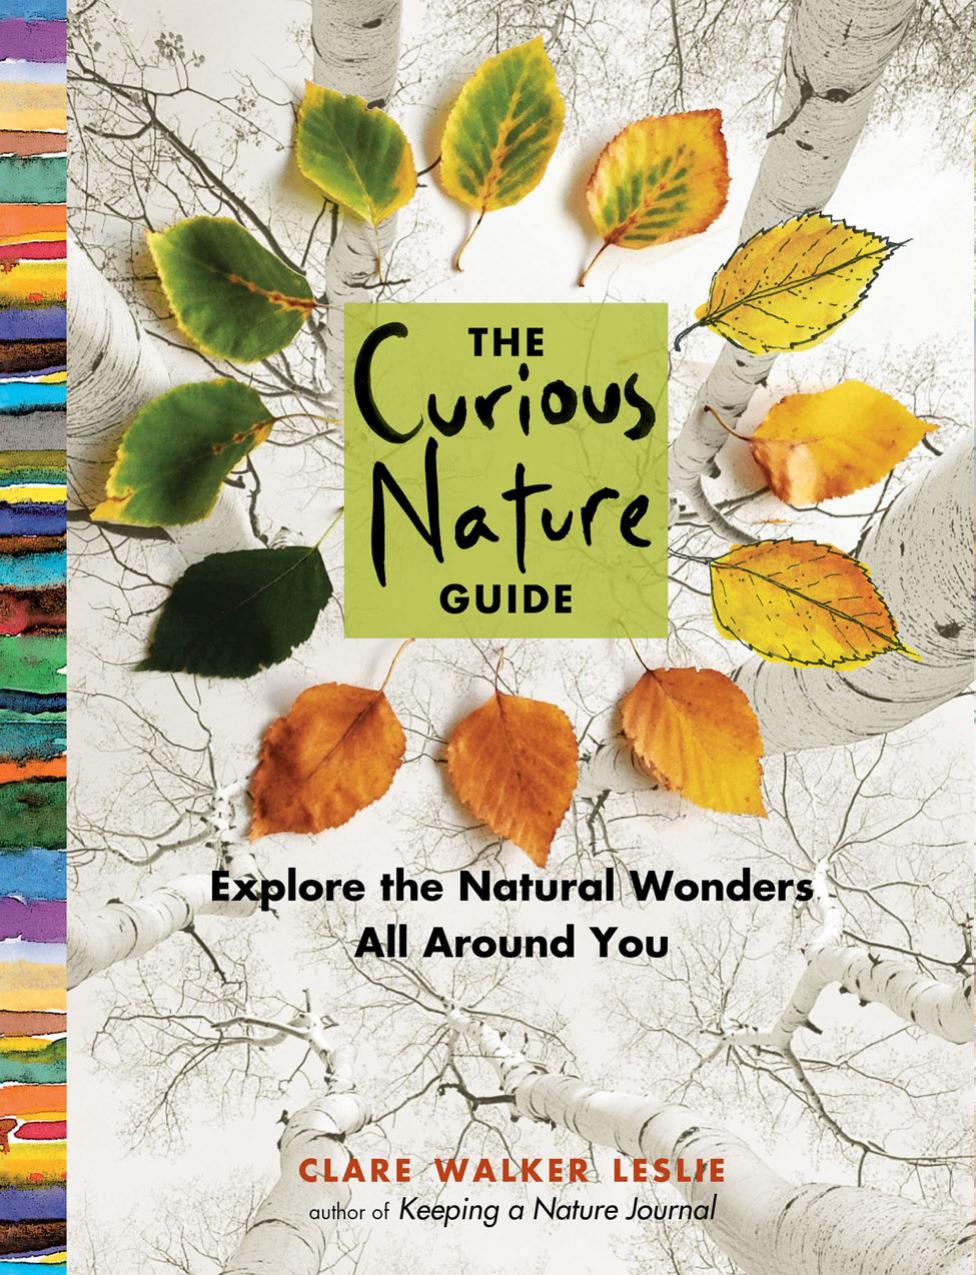 The Curious Nature Guide by Clare Walker Leslie